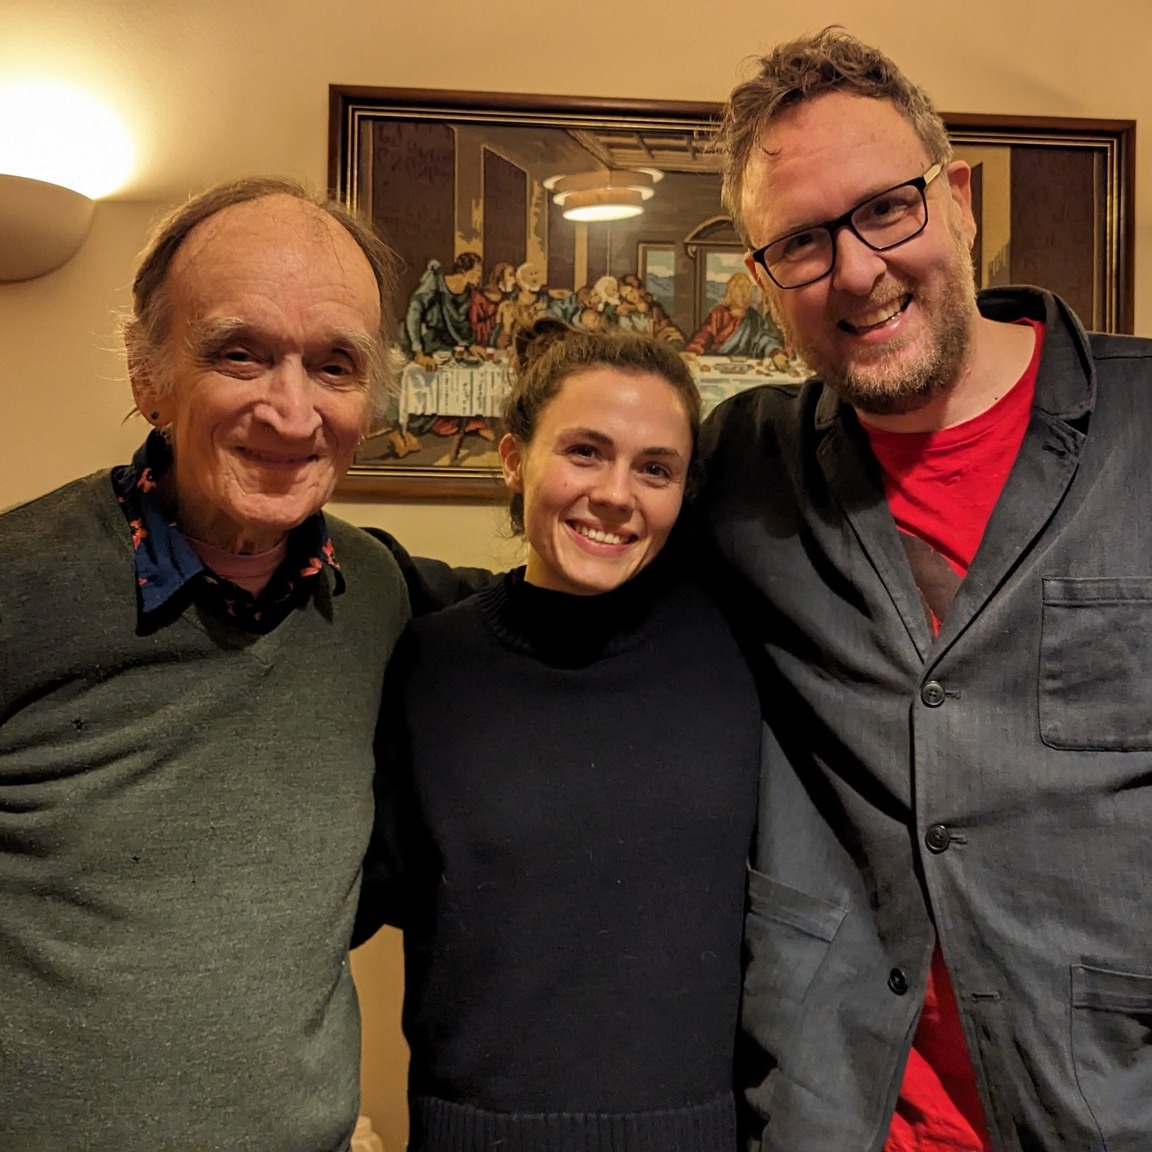 Love this photo of @JonWilksMusic @Ellie_Gowers and #MartinCarthy from Saturday night's event! Still processing it all, but these smiles sum up how I felt too. A great night for #Kenilworth.